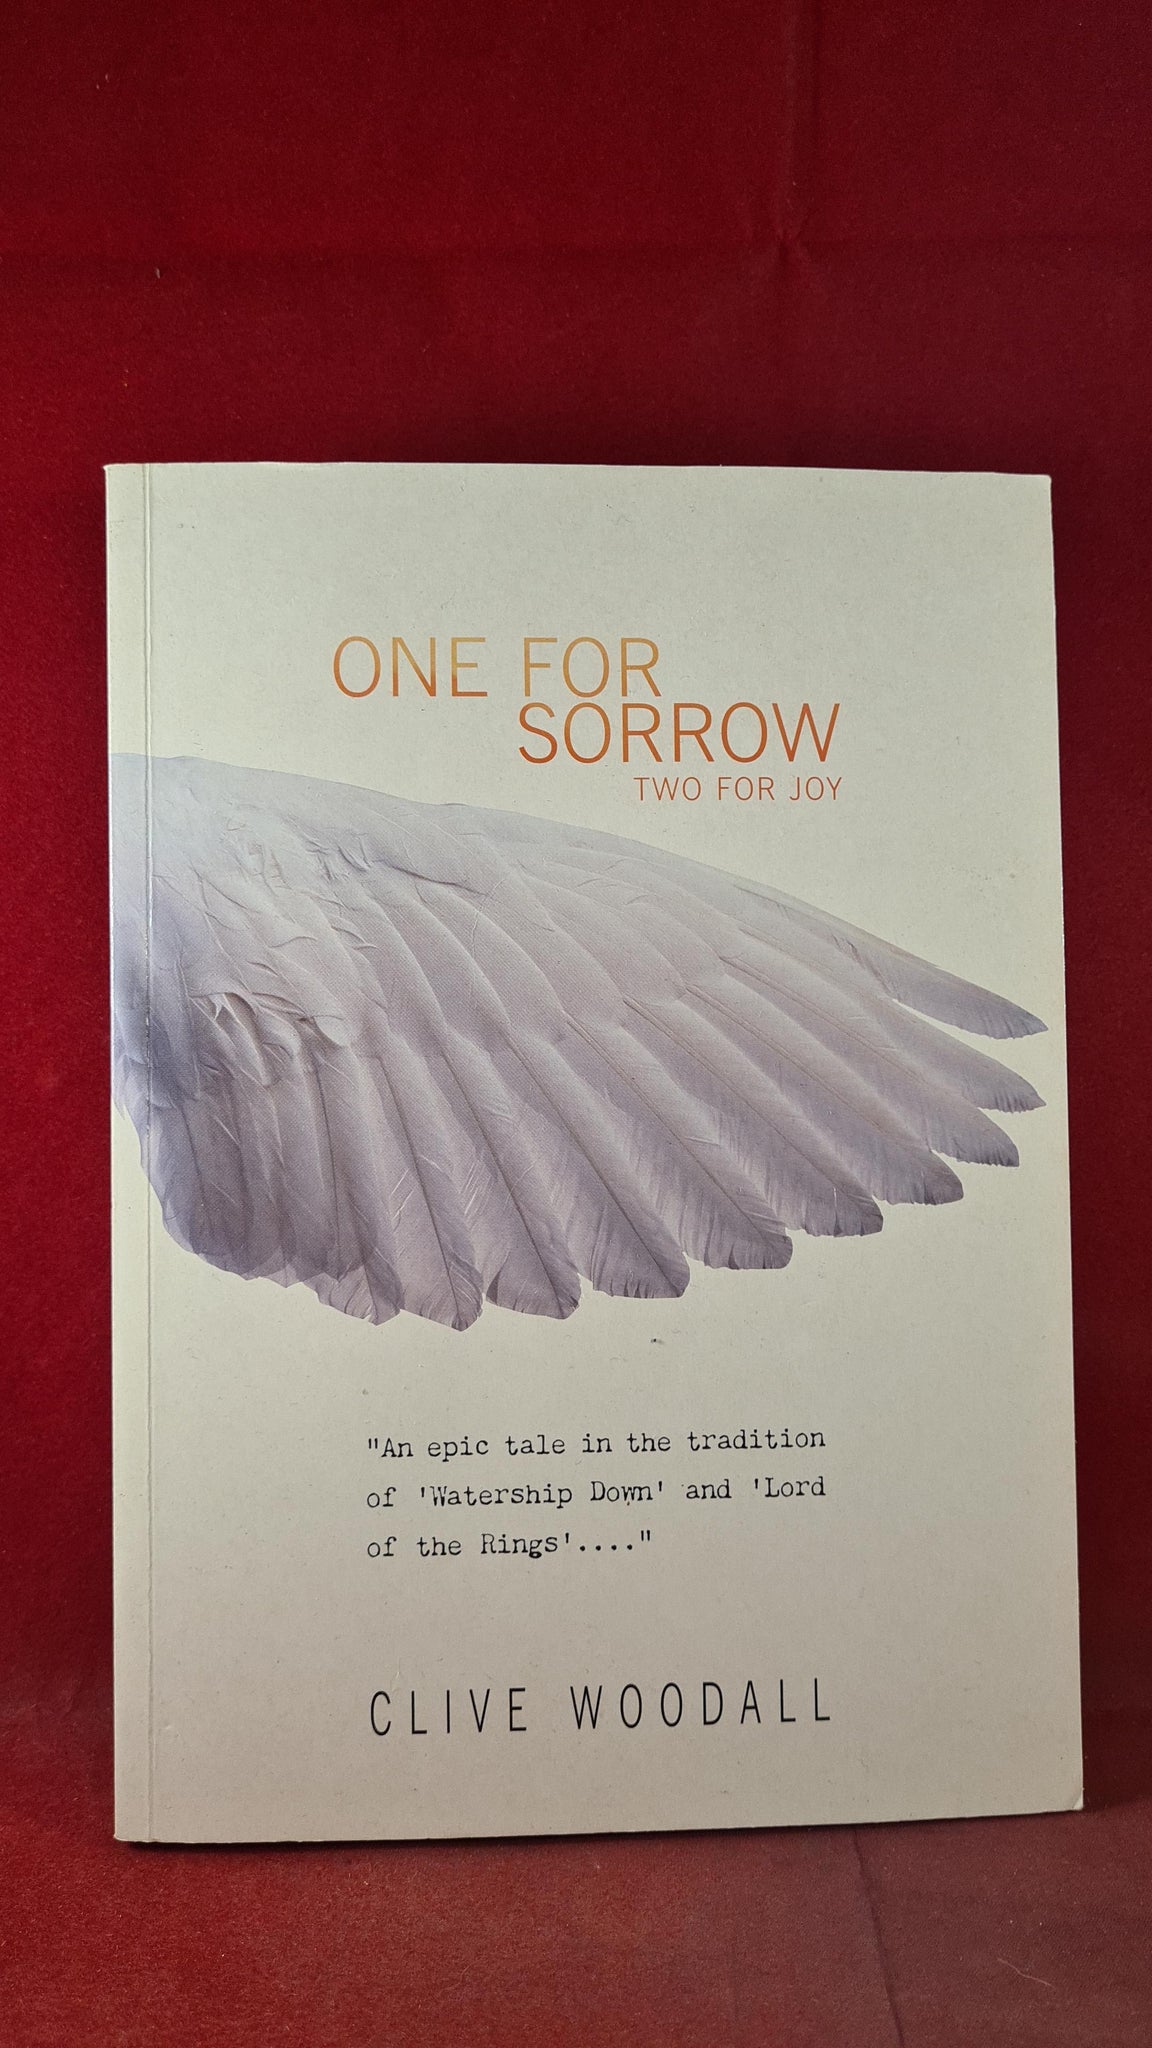 One for Sorrow, Two for Joy by Clive Woodall